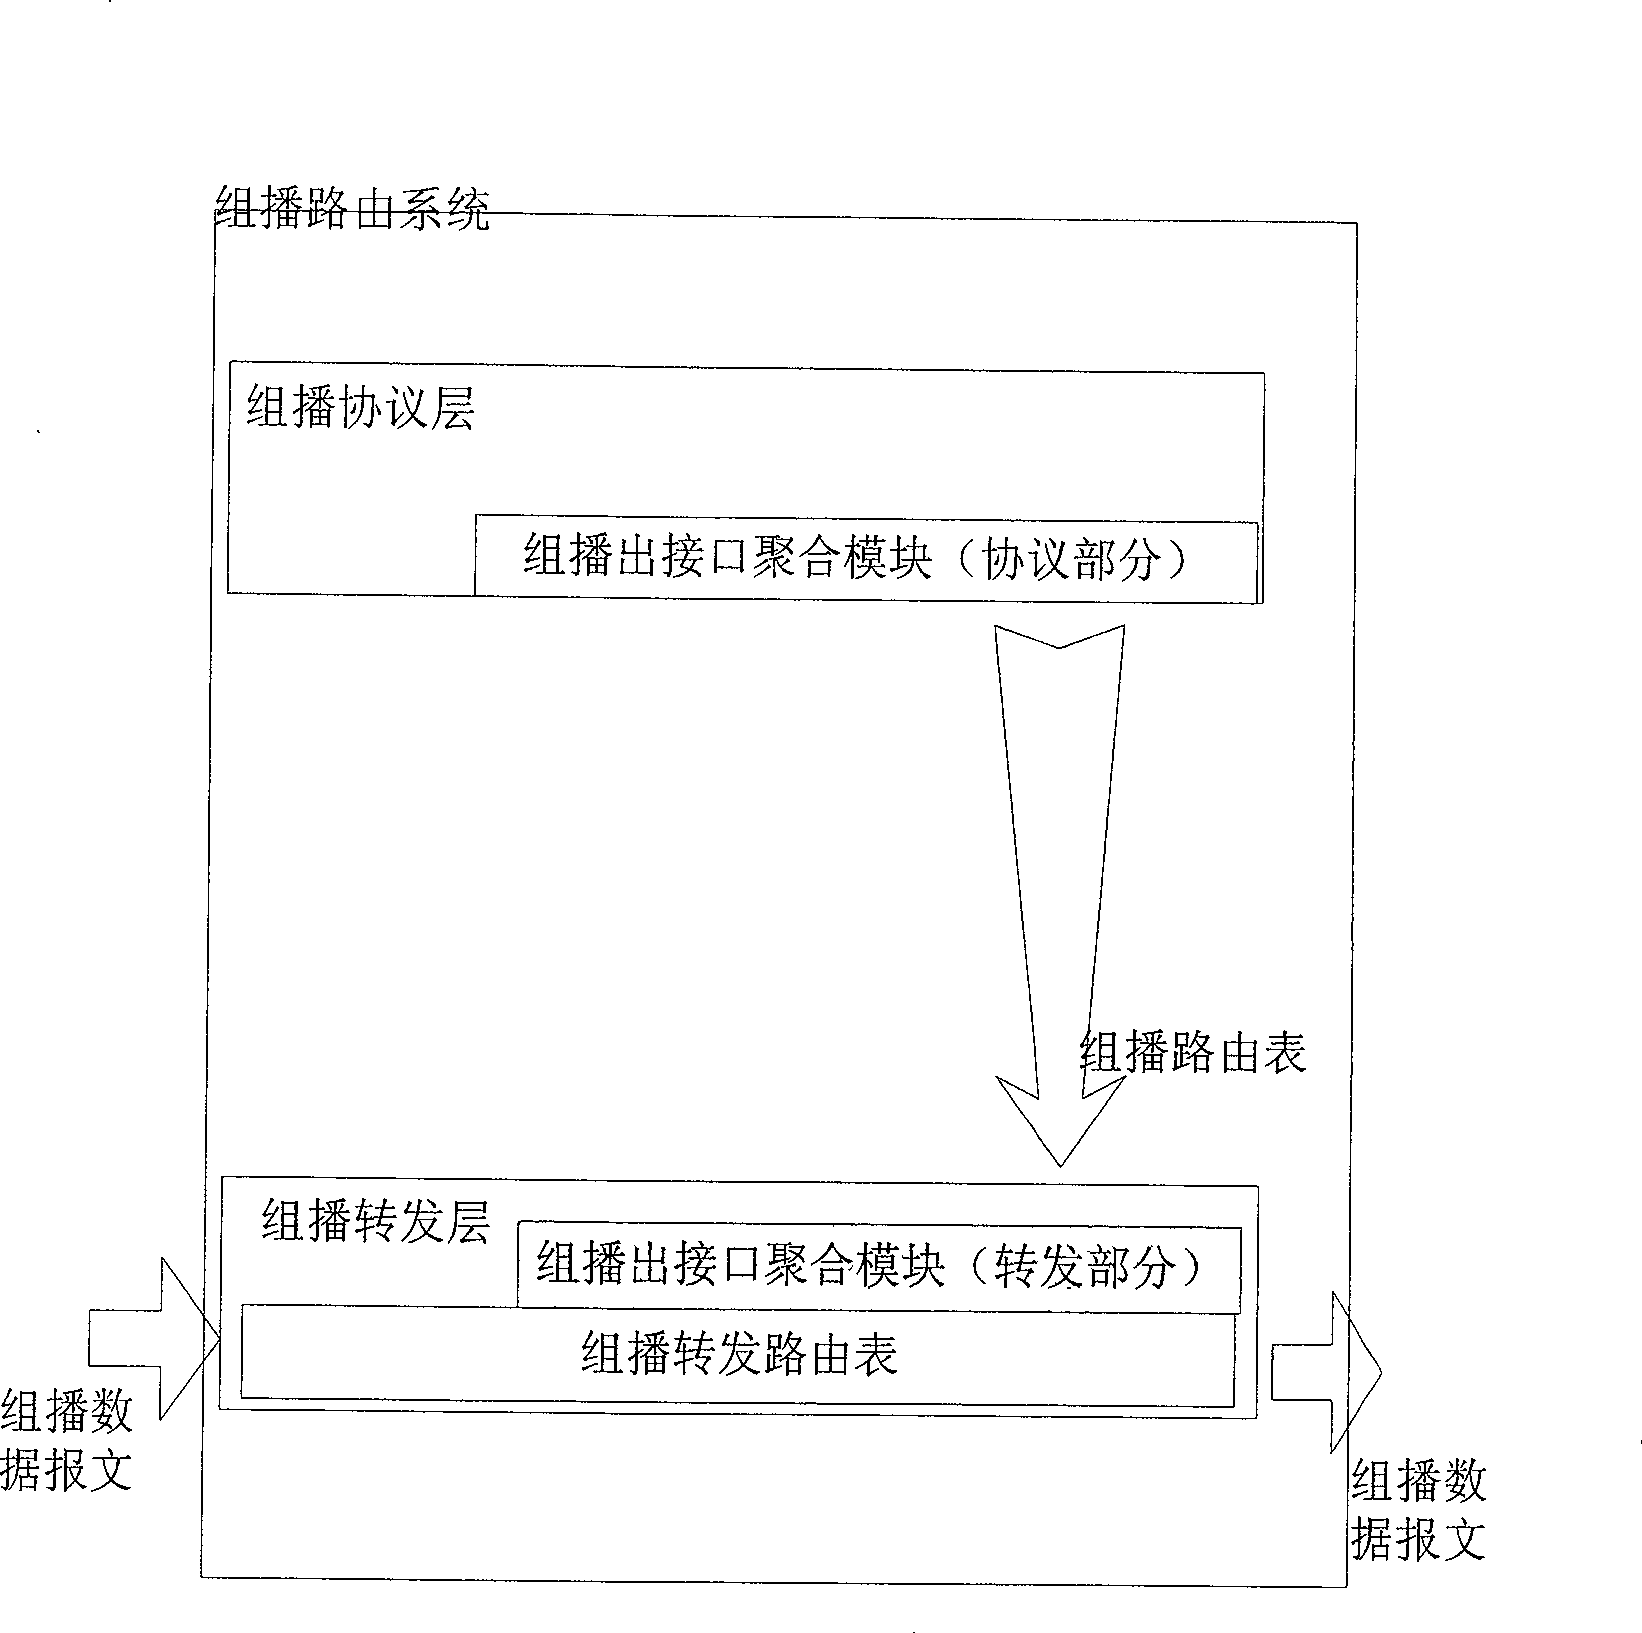 Multicast forwarding route aggregating method